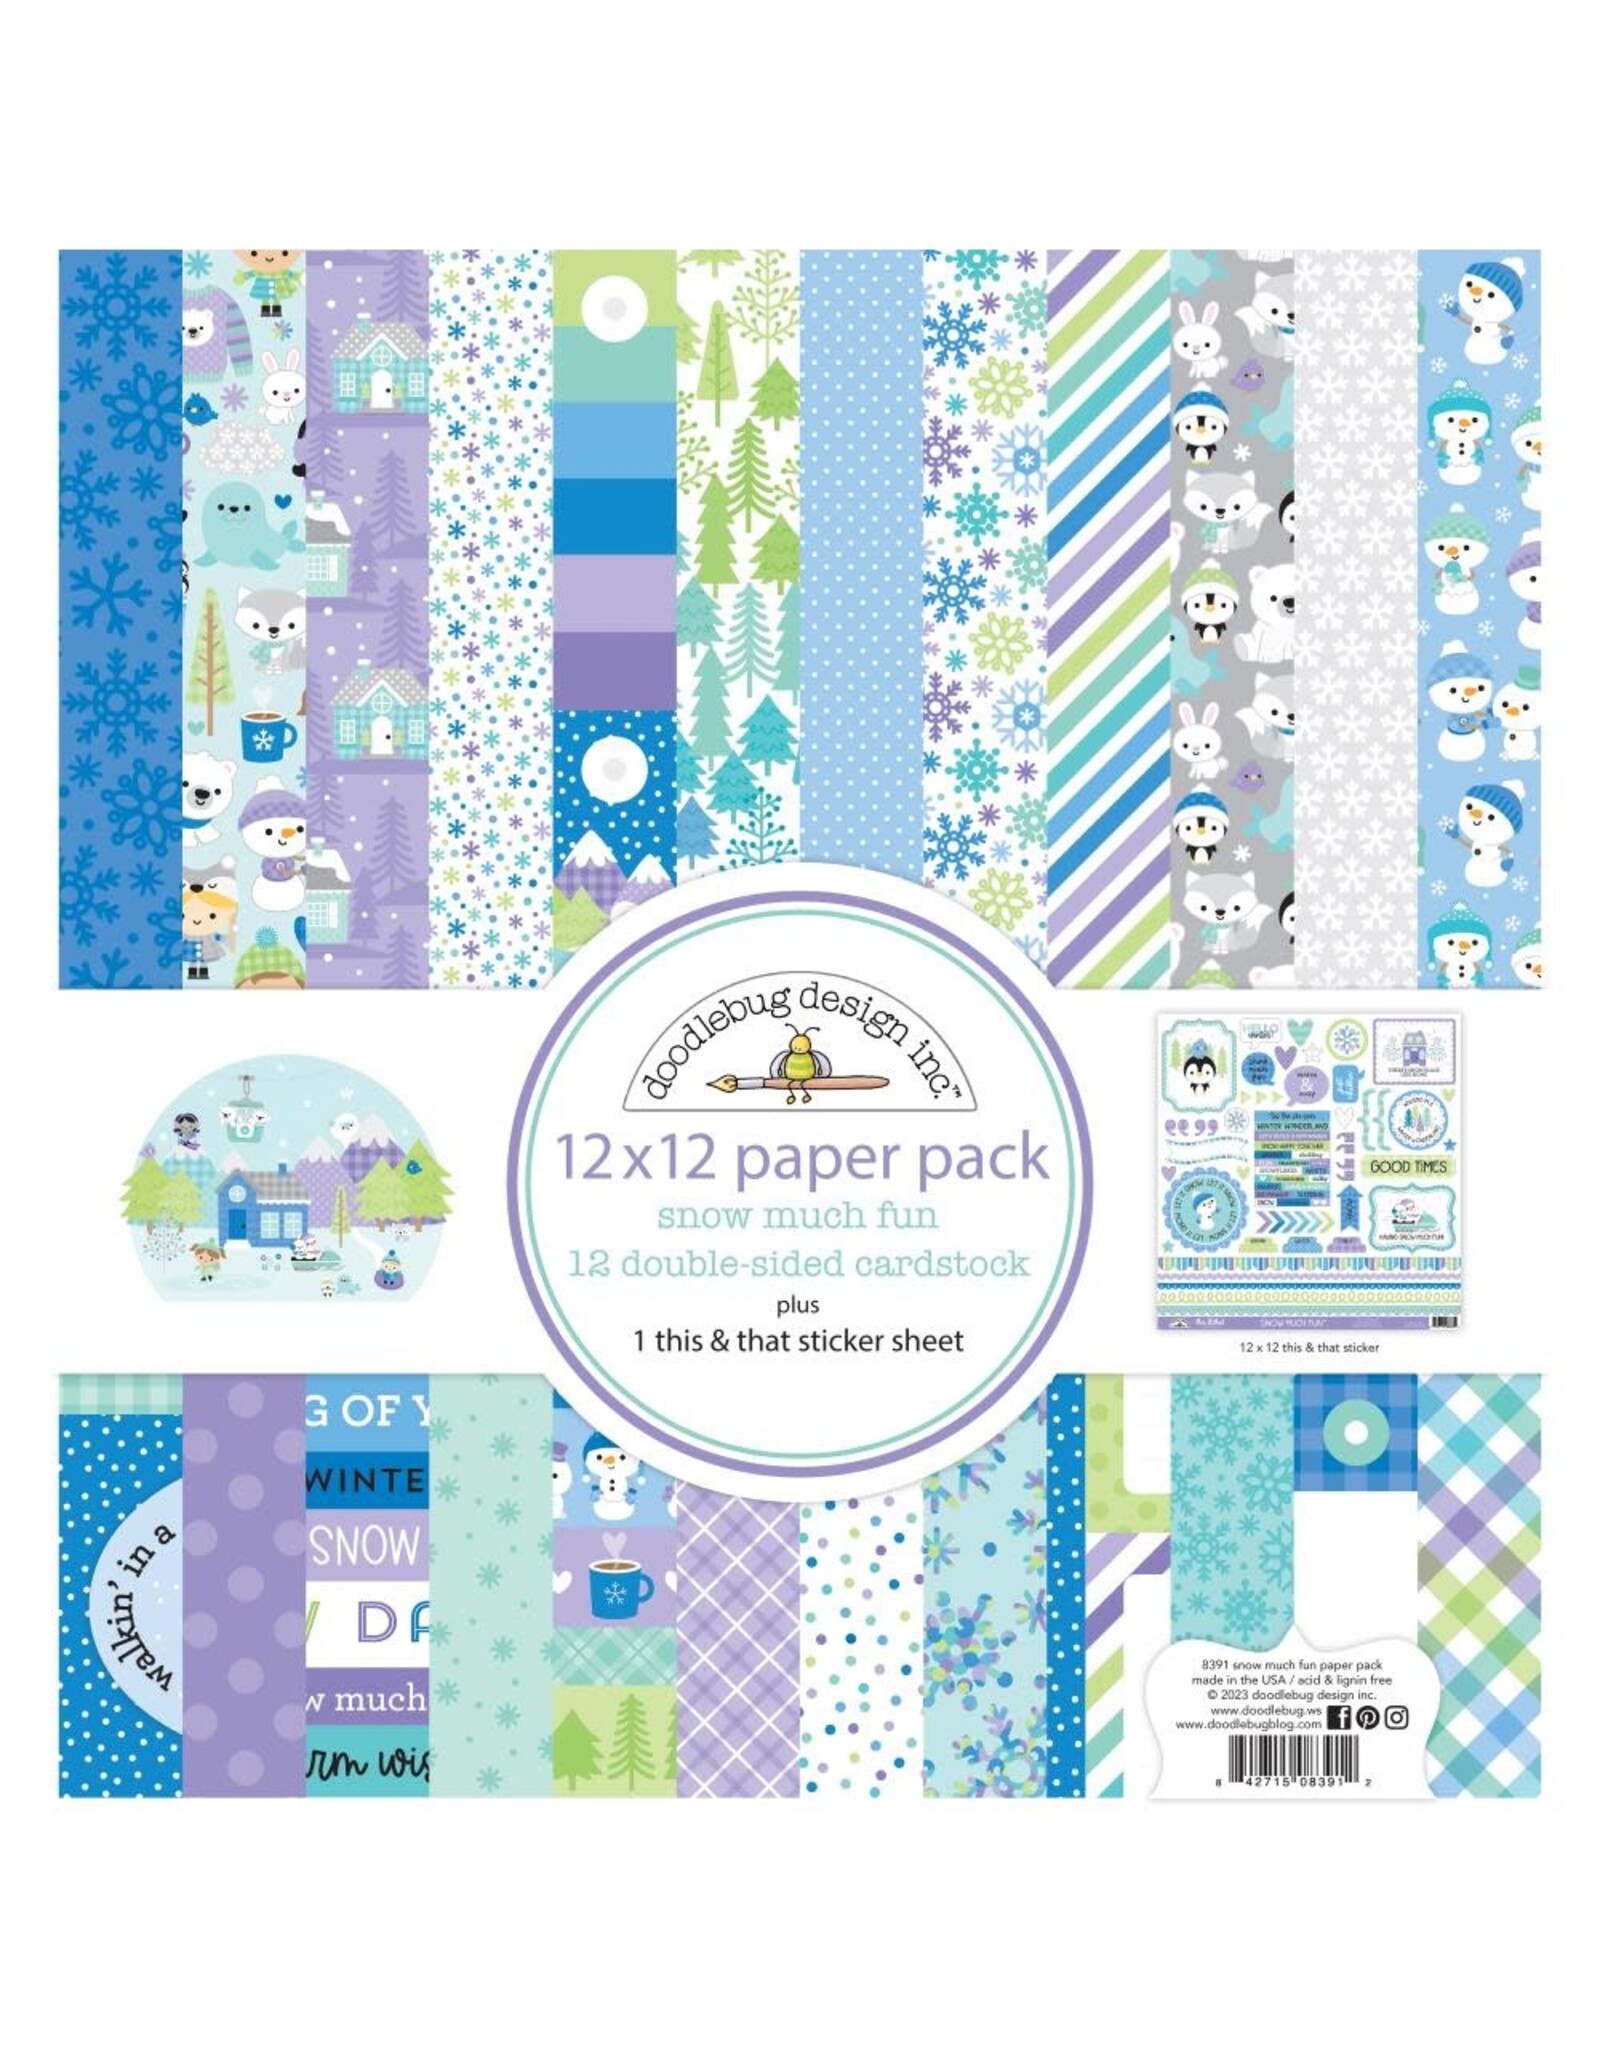 Doodlebug Design Snow Much Fun - 12x12 Paper Pack